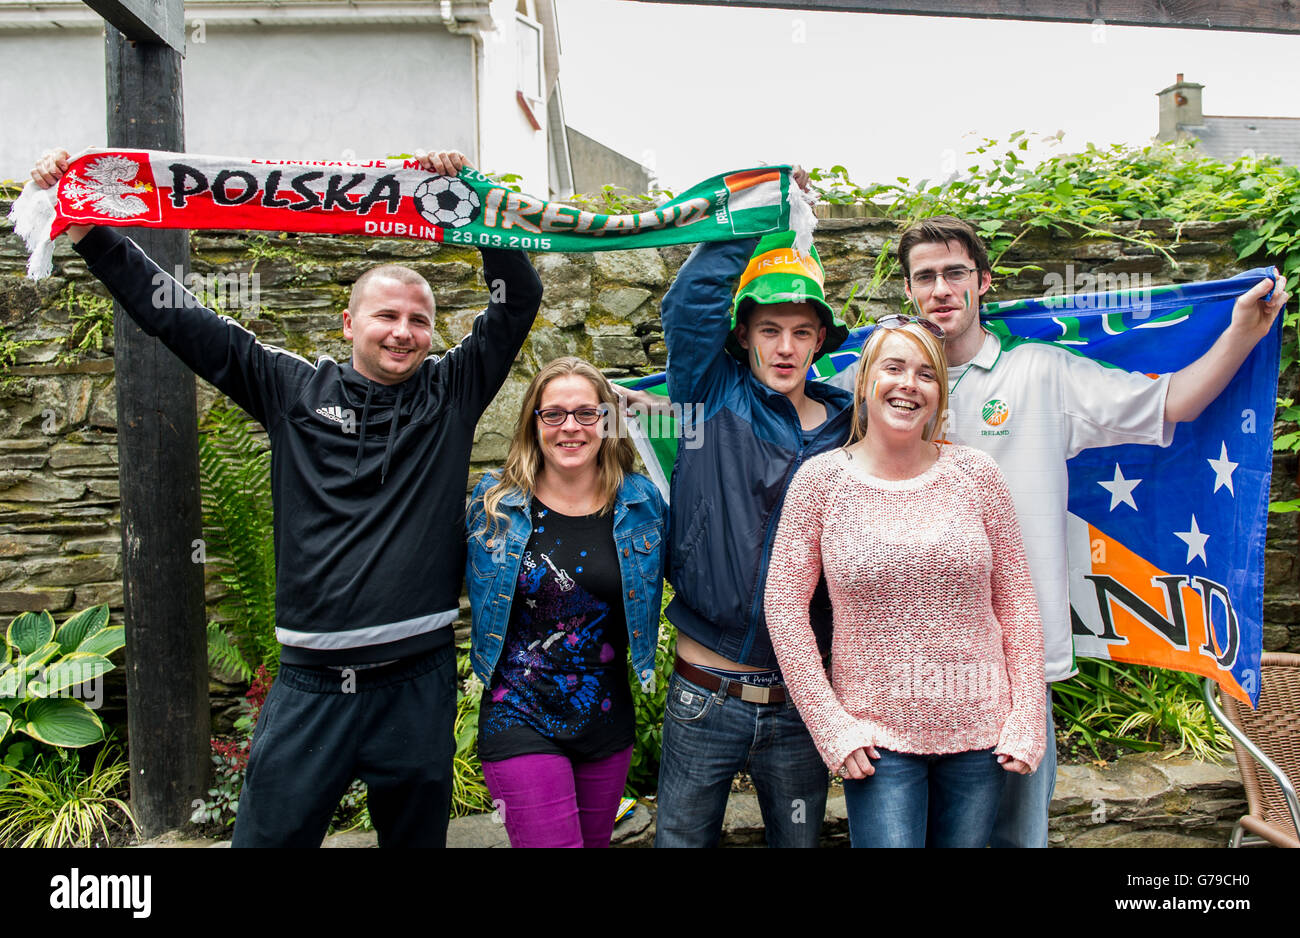 Skibbereen, West Cork, Ireland. 26th June, 2016. Ireland fans Michael Bokrs; Linda Casey; Conor McCarthy; Samantha Savage and Damien Burke, all from Skibbereen, were all smiles before watching the Ireland Vs France game in the Eldon Hotel in Skibbereen in the 2016 Euros. Credit: Andy Gibson/Alamy Live News. Stock Photo